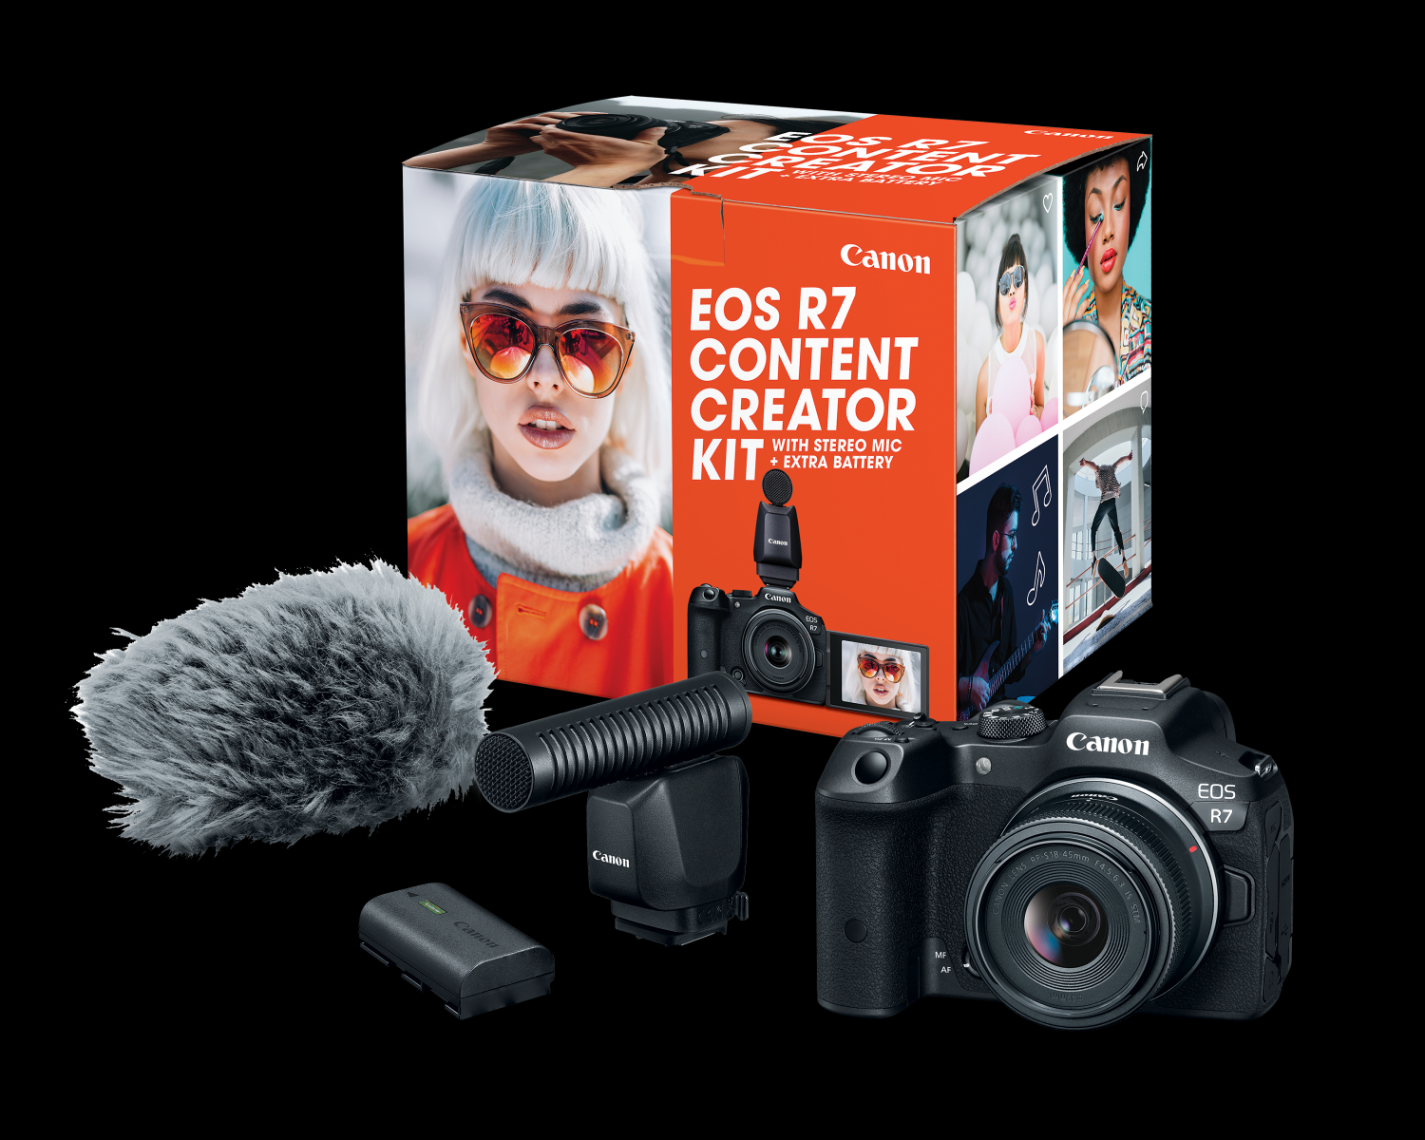 Upgrade Your Canon Camera With The Ultimate Creator Accessory Kit!